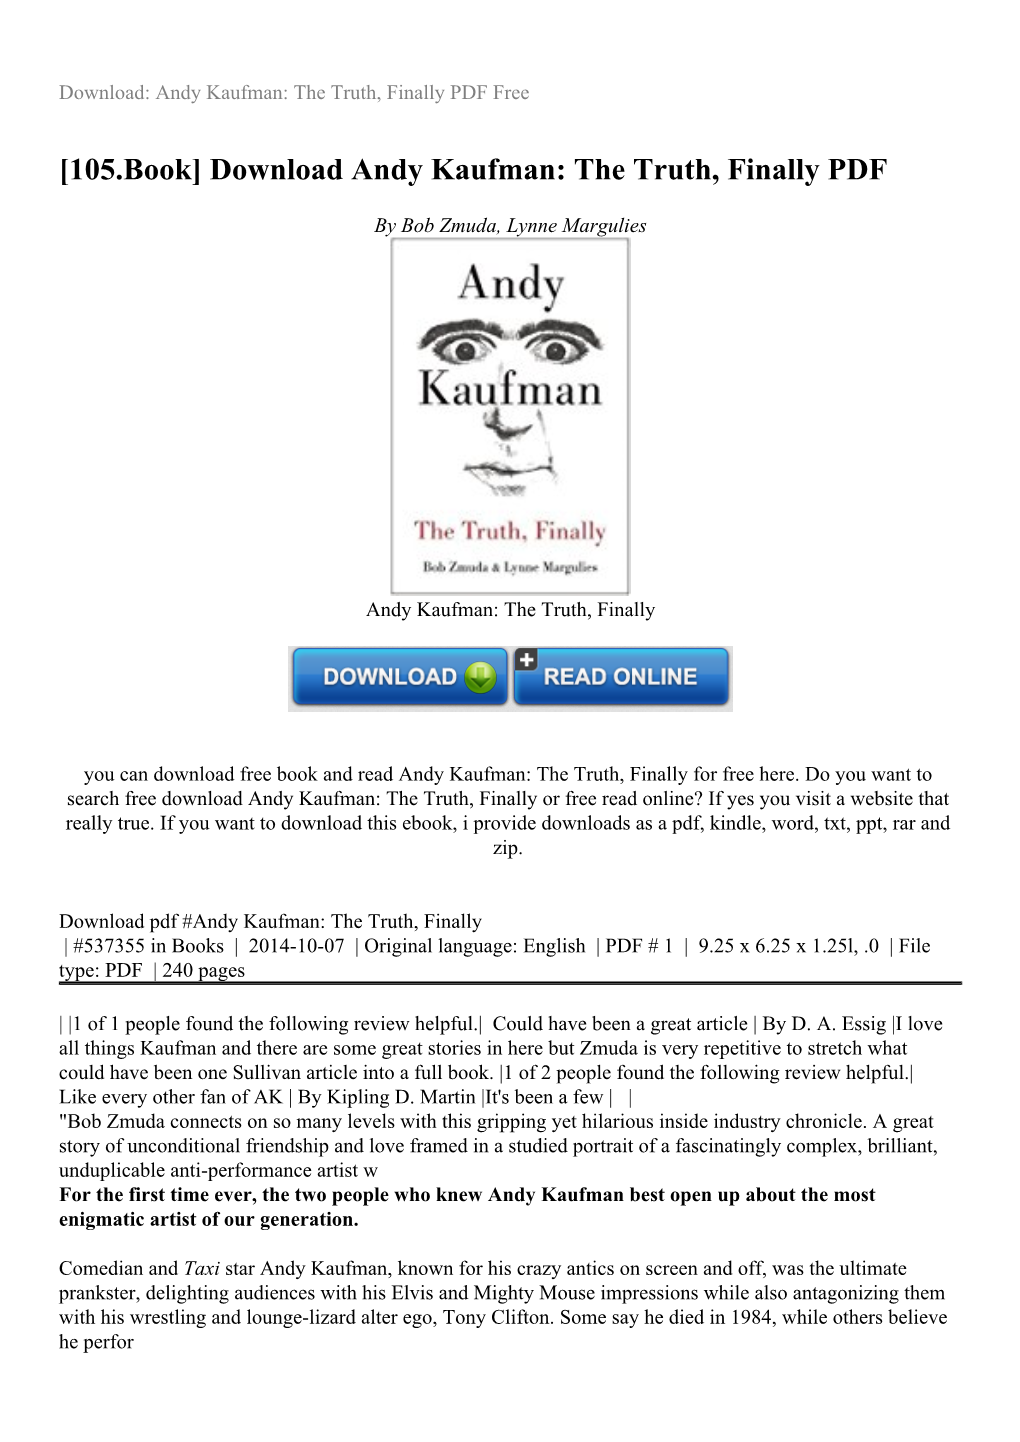 Download Andy Kaufman: the Truth, Finally PDF